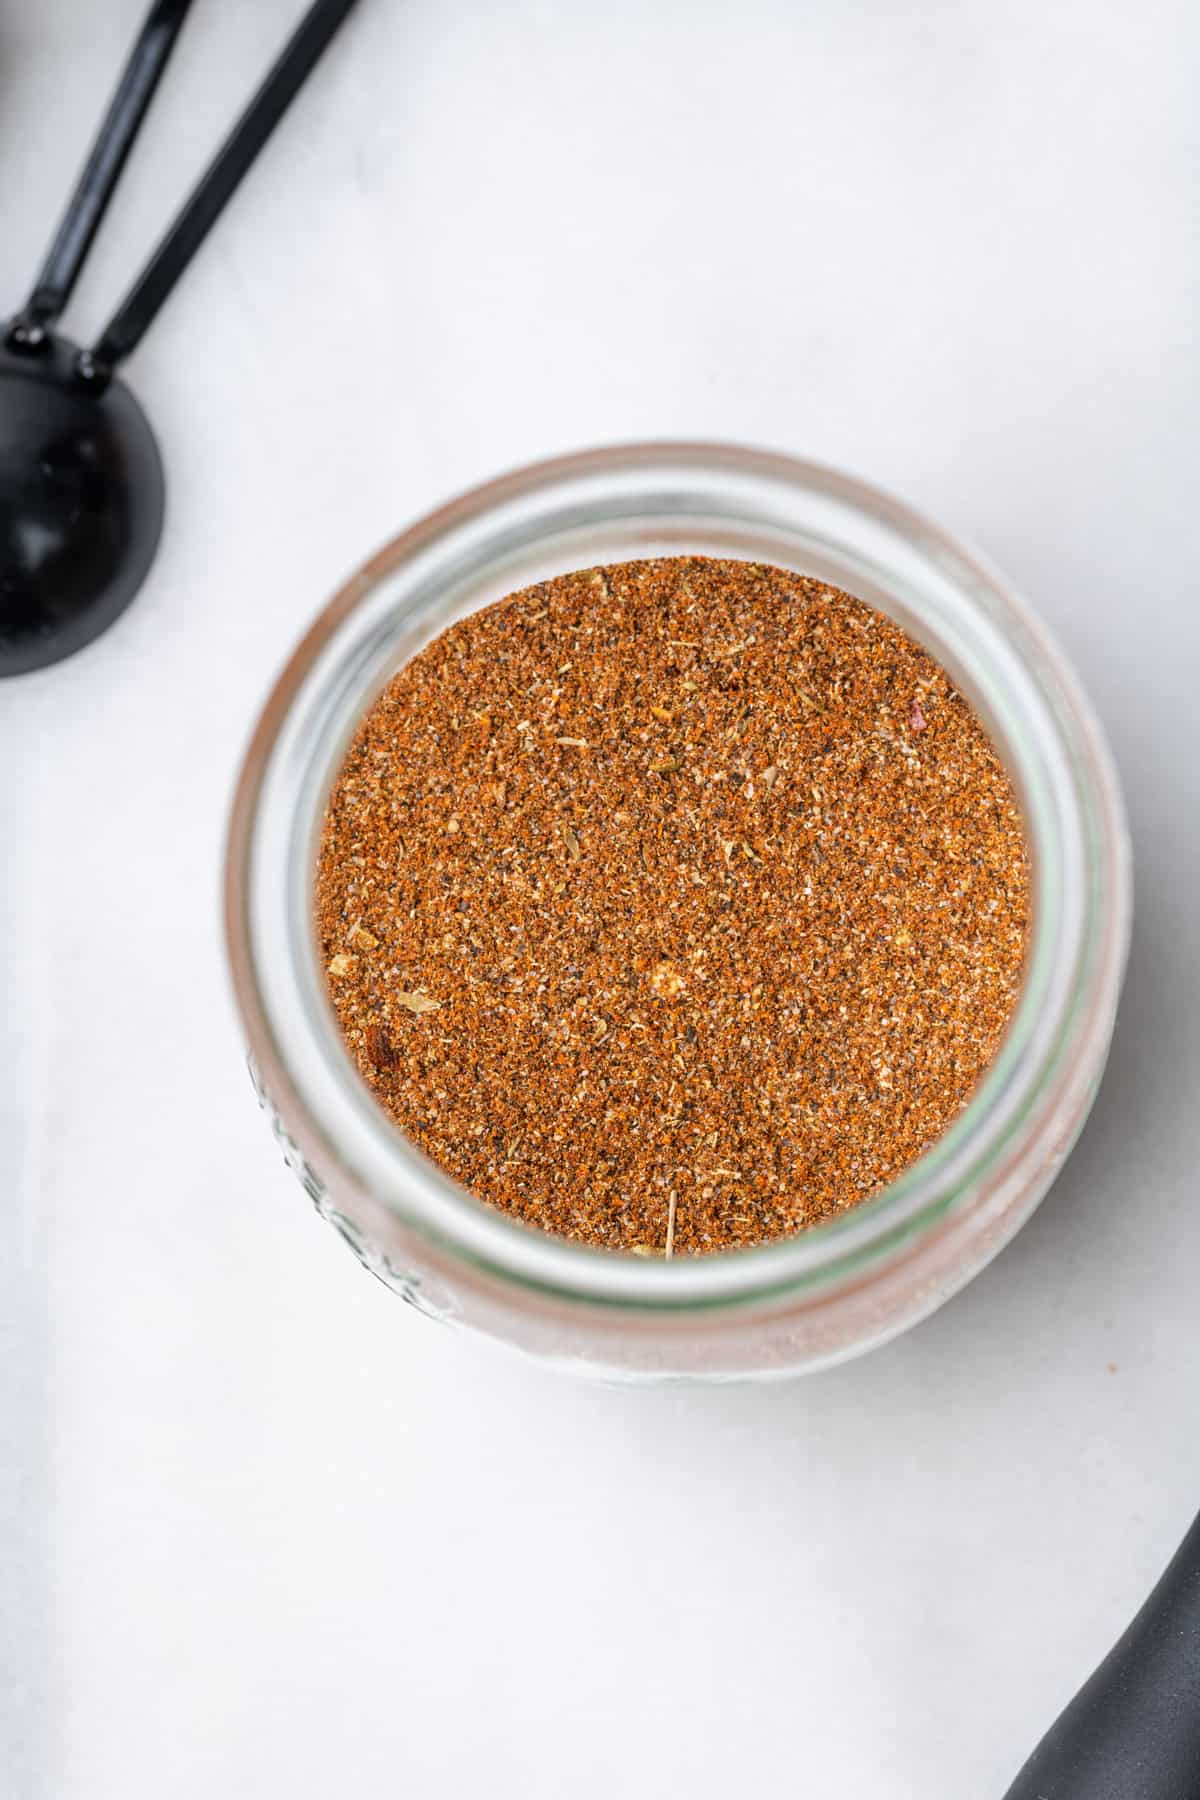 A jar filled with homemade taco seasoning on a white table.